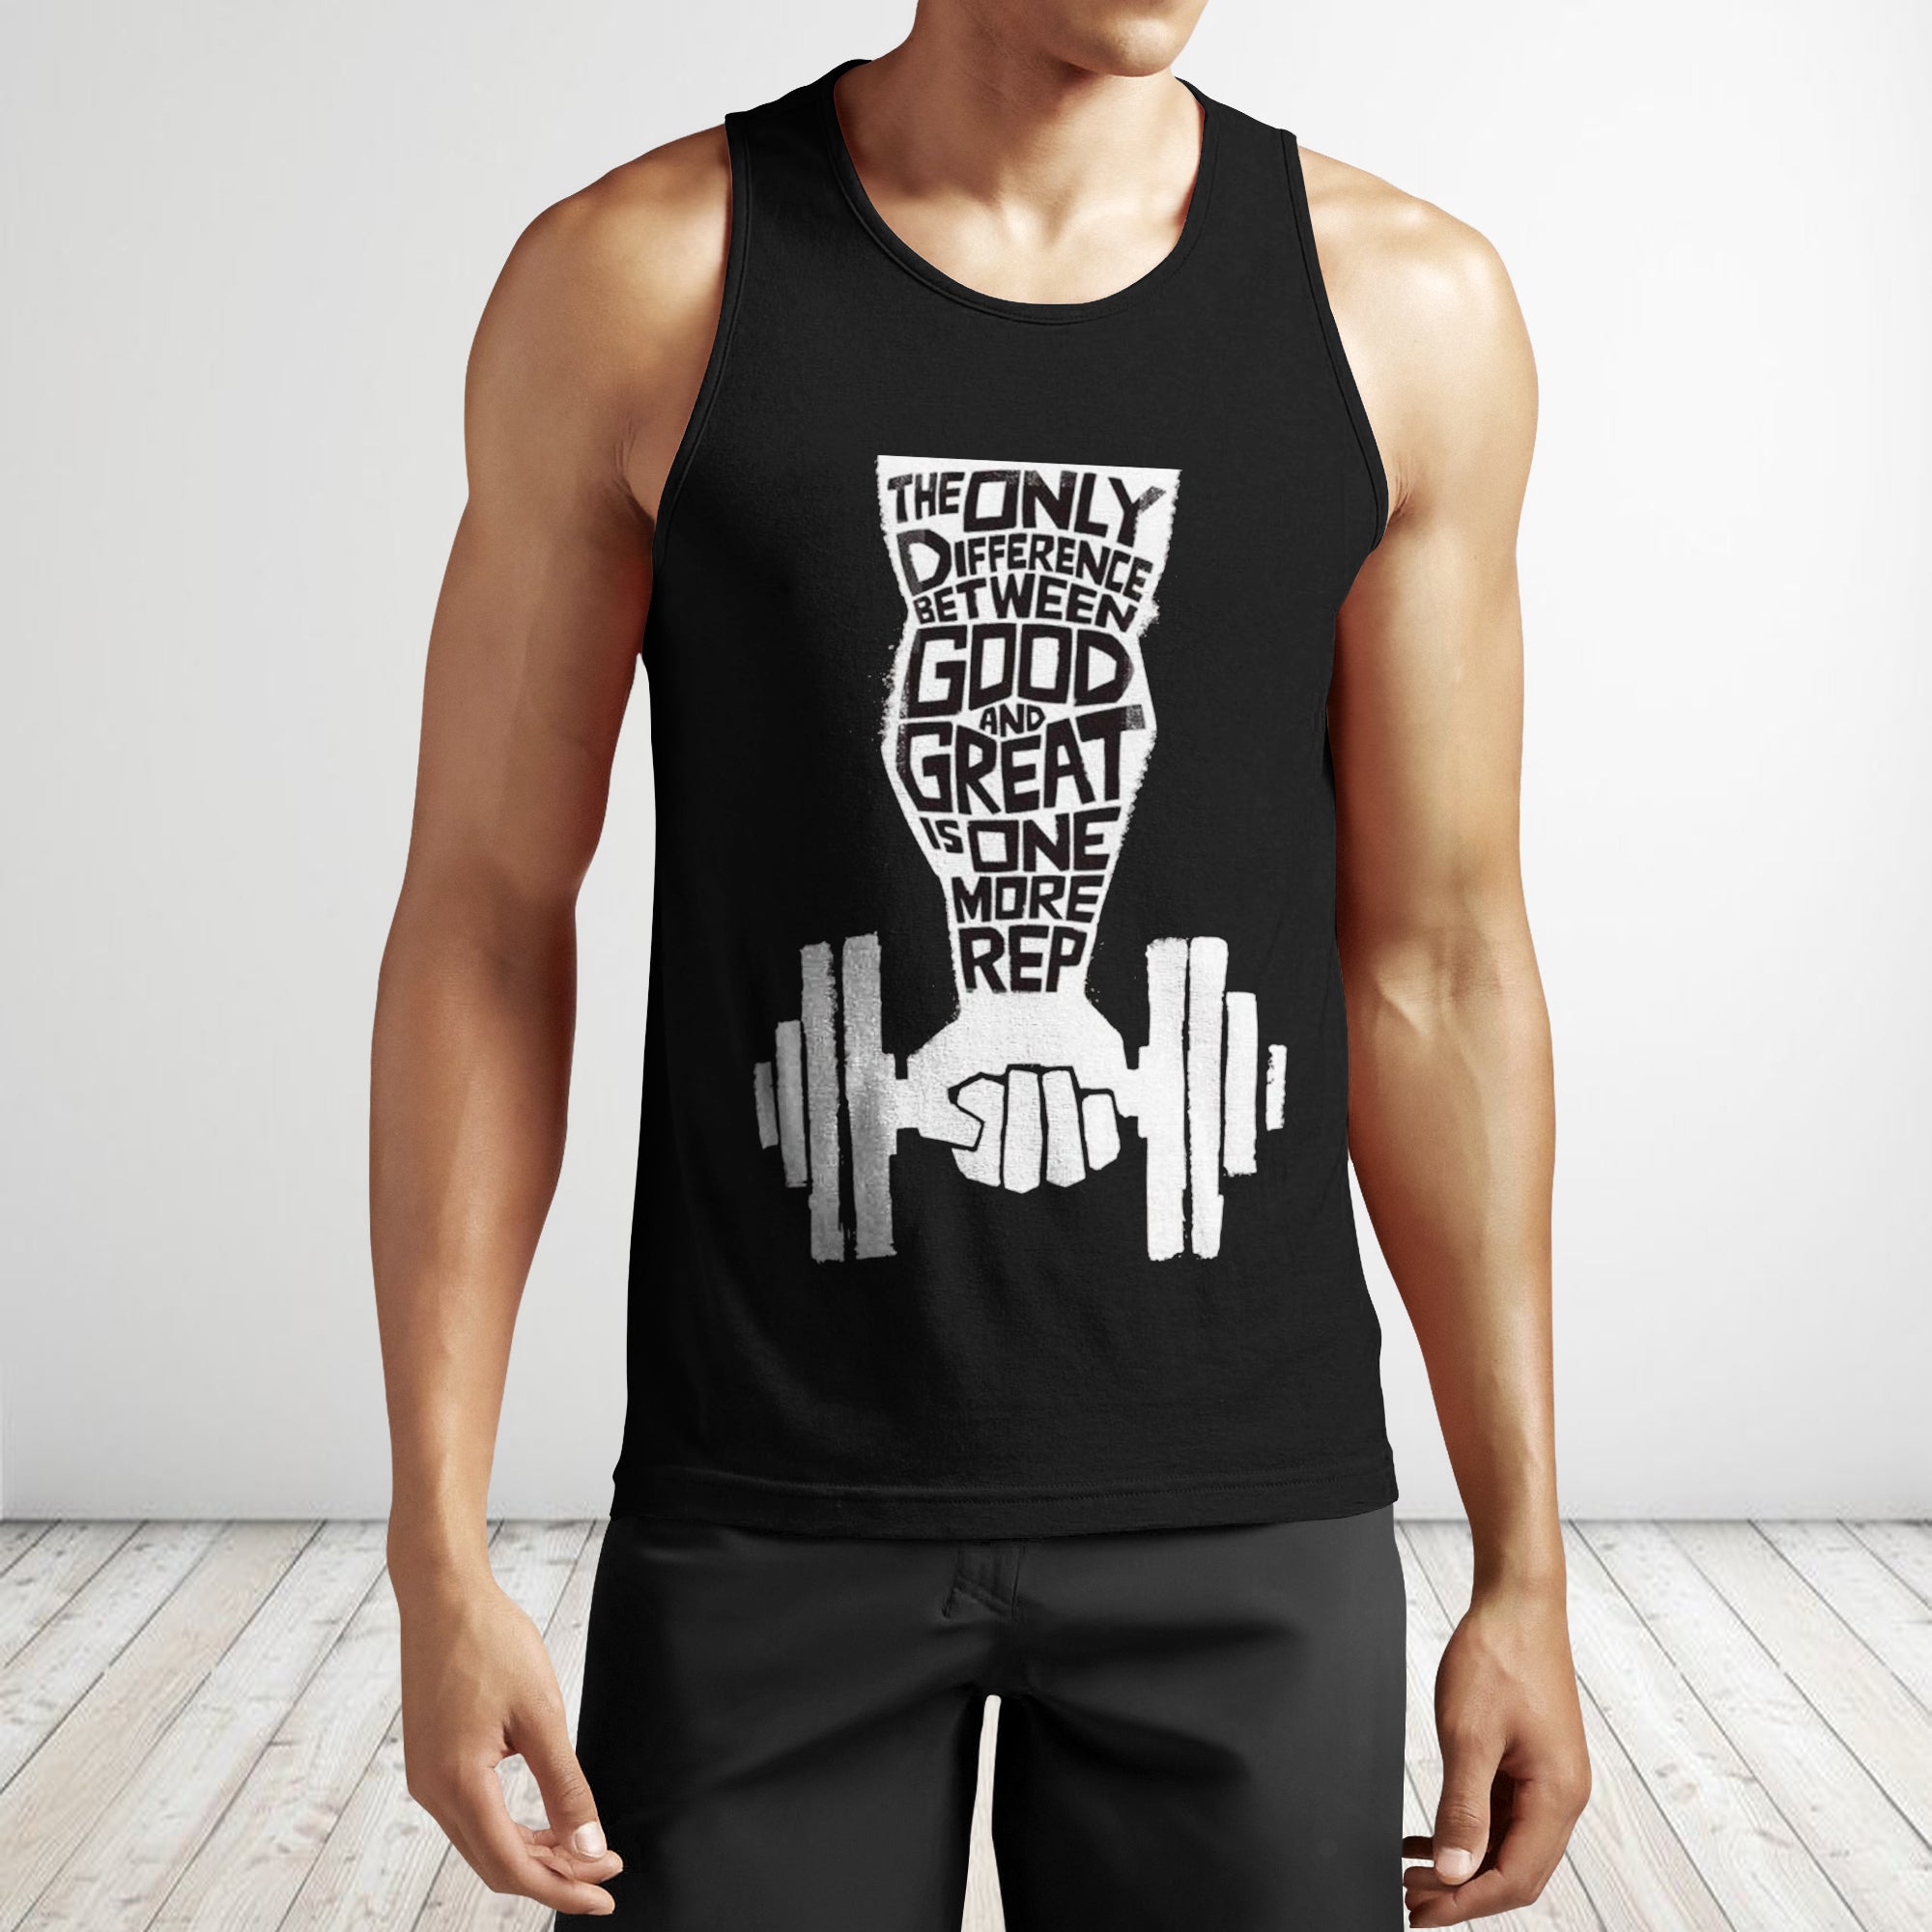 Workout Mode Gym Weightlifting Exercise Men s Tank' Women's T